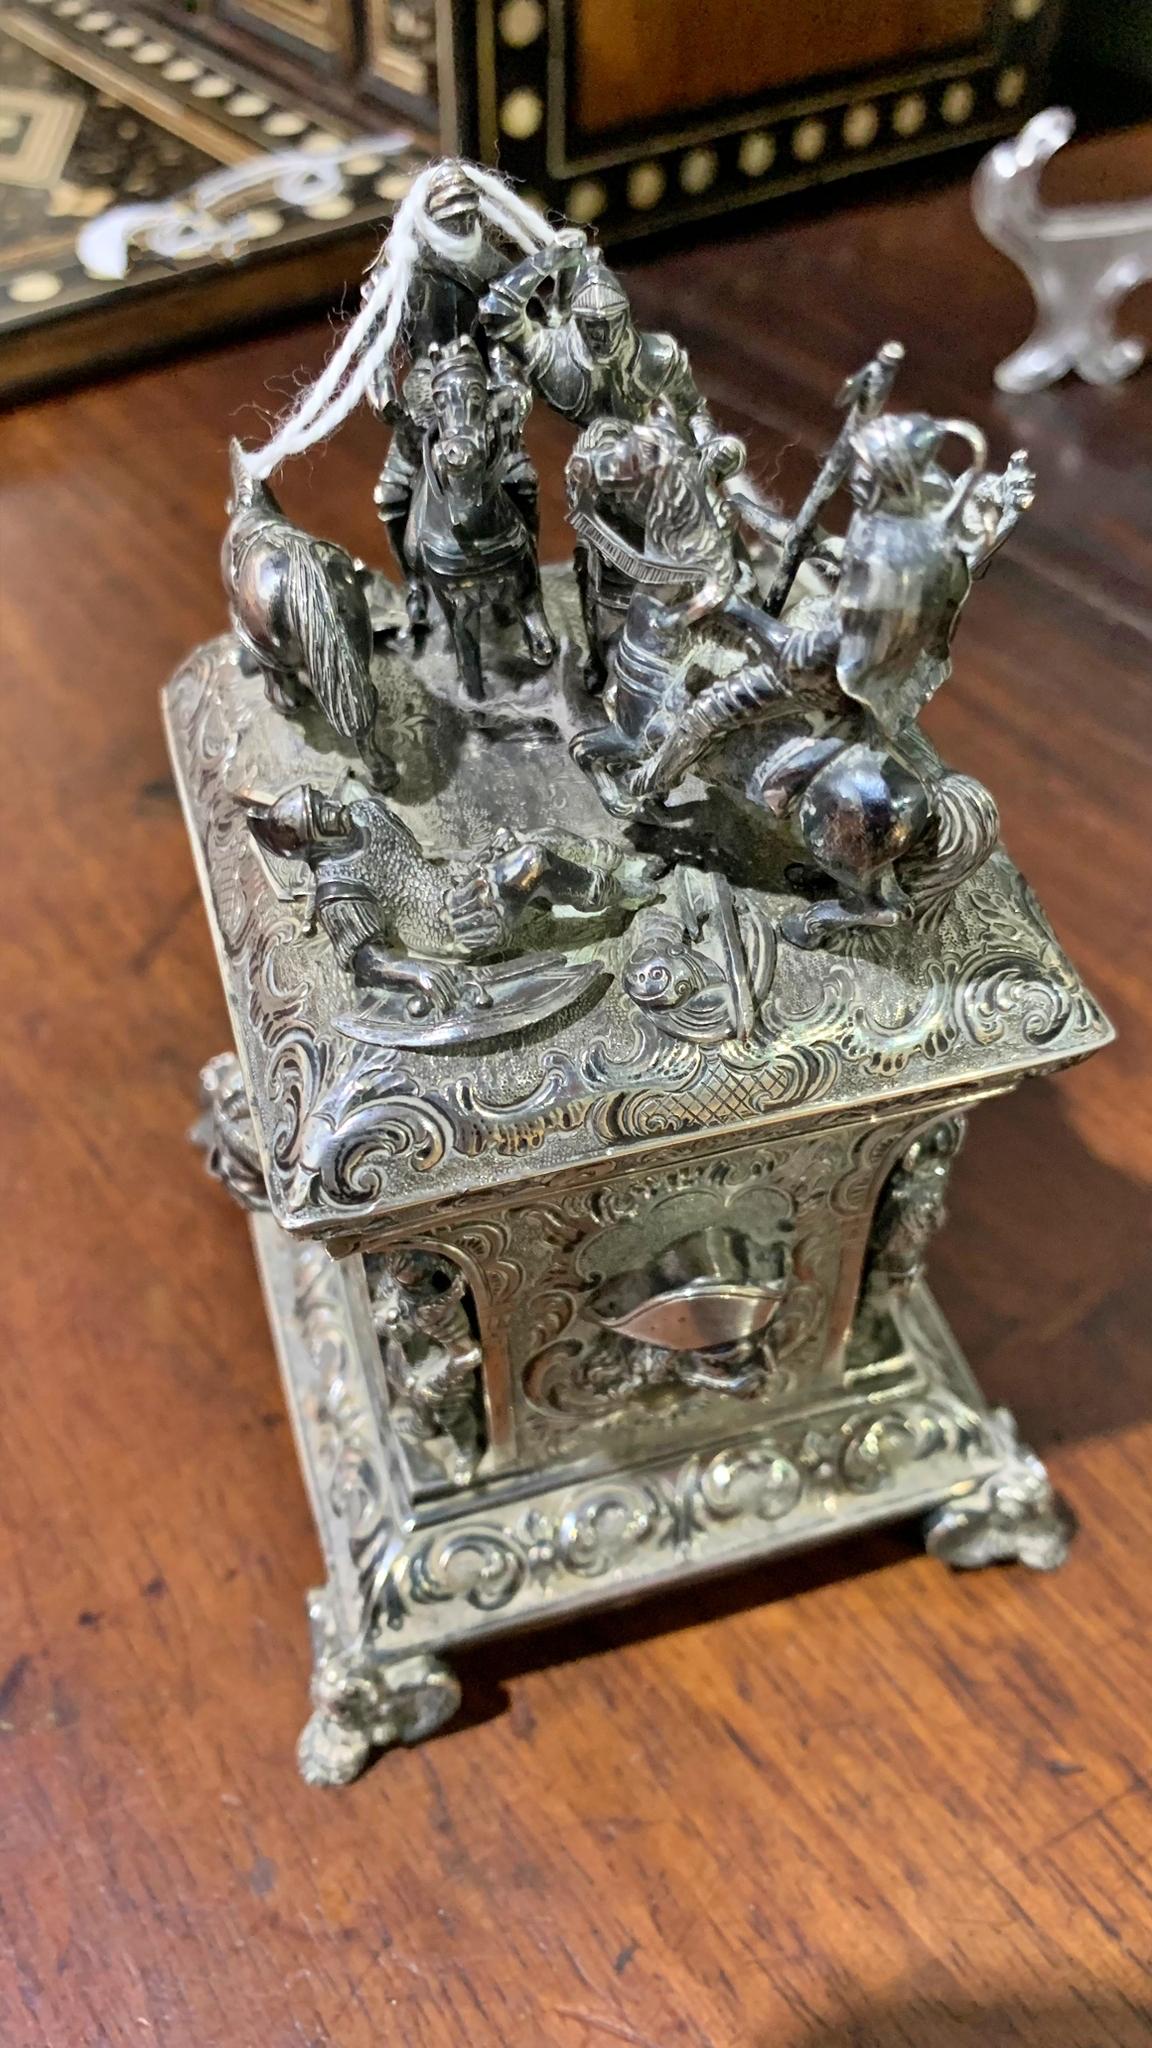 SILVER BOX

Austria-Hungary 18th Century
in silver with profuse decoration inspired by the Crimean War, in which Russia lost to an alliance of the Ottoman Empire, France, United Kingdom and Piedmont-Sardinia represented by the four busts